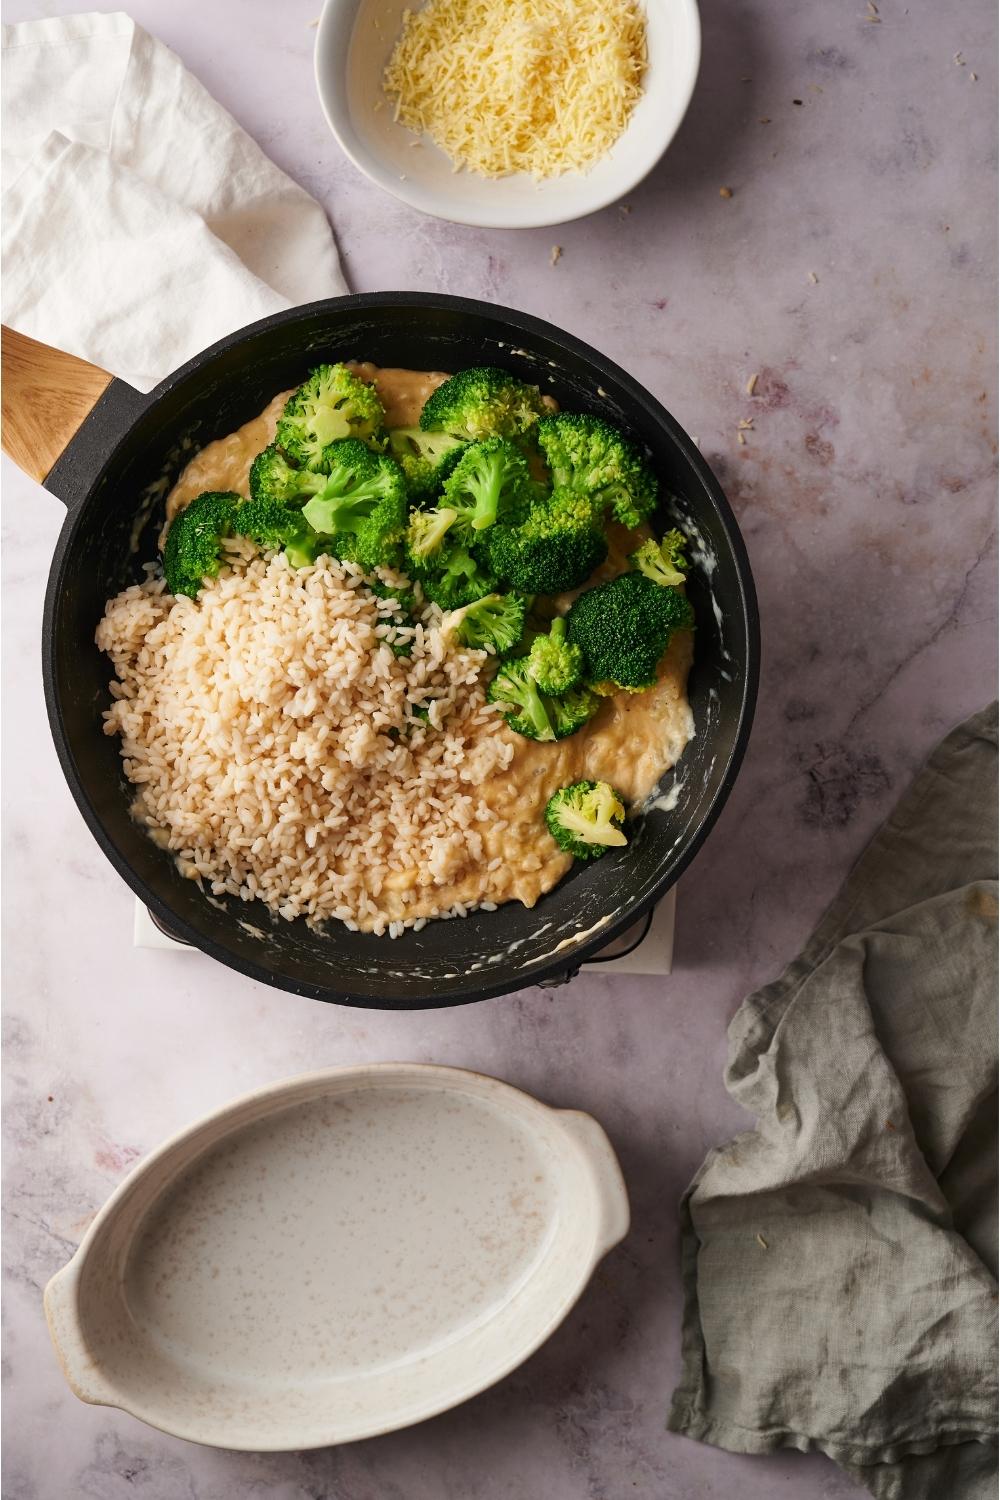 Skillet with rice and broccoli freshly added to a cheesy sauce to make broccoli rice casserole, next to an empty plate and a bowl of shredded cheese.